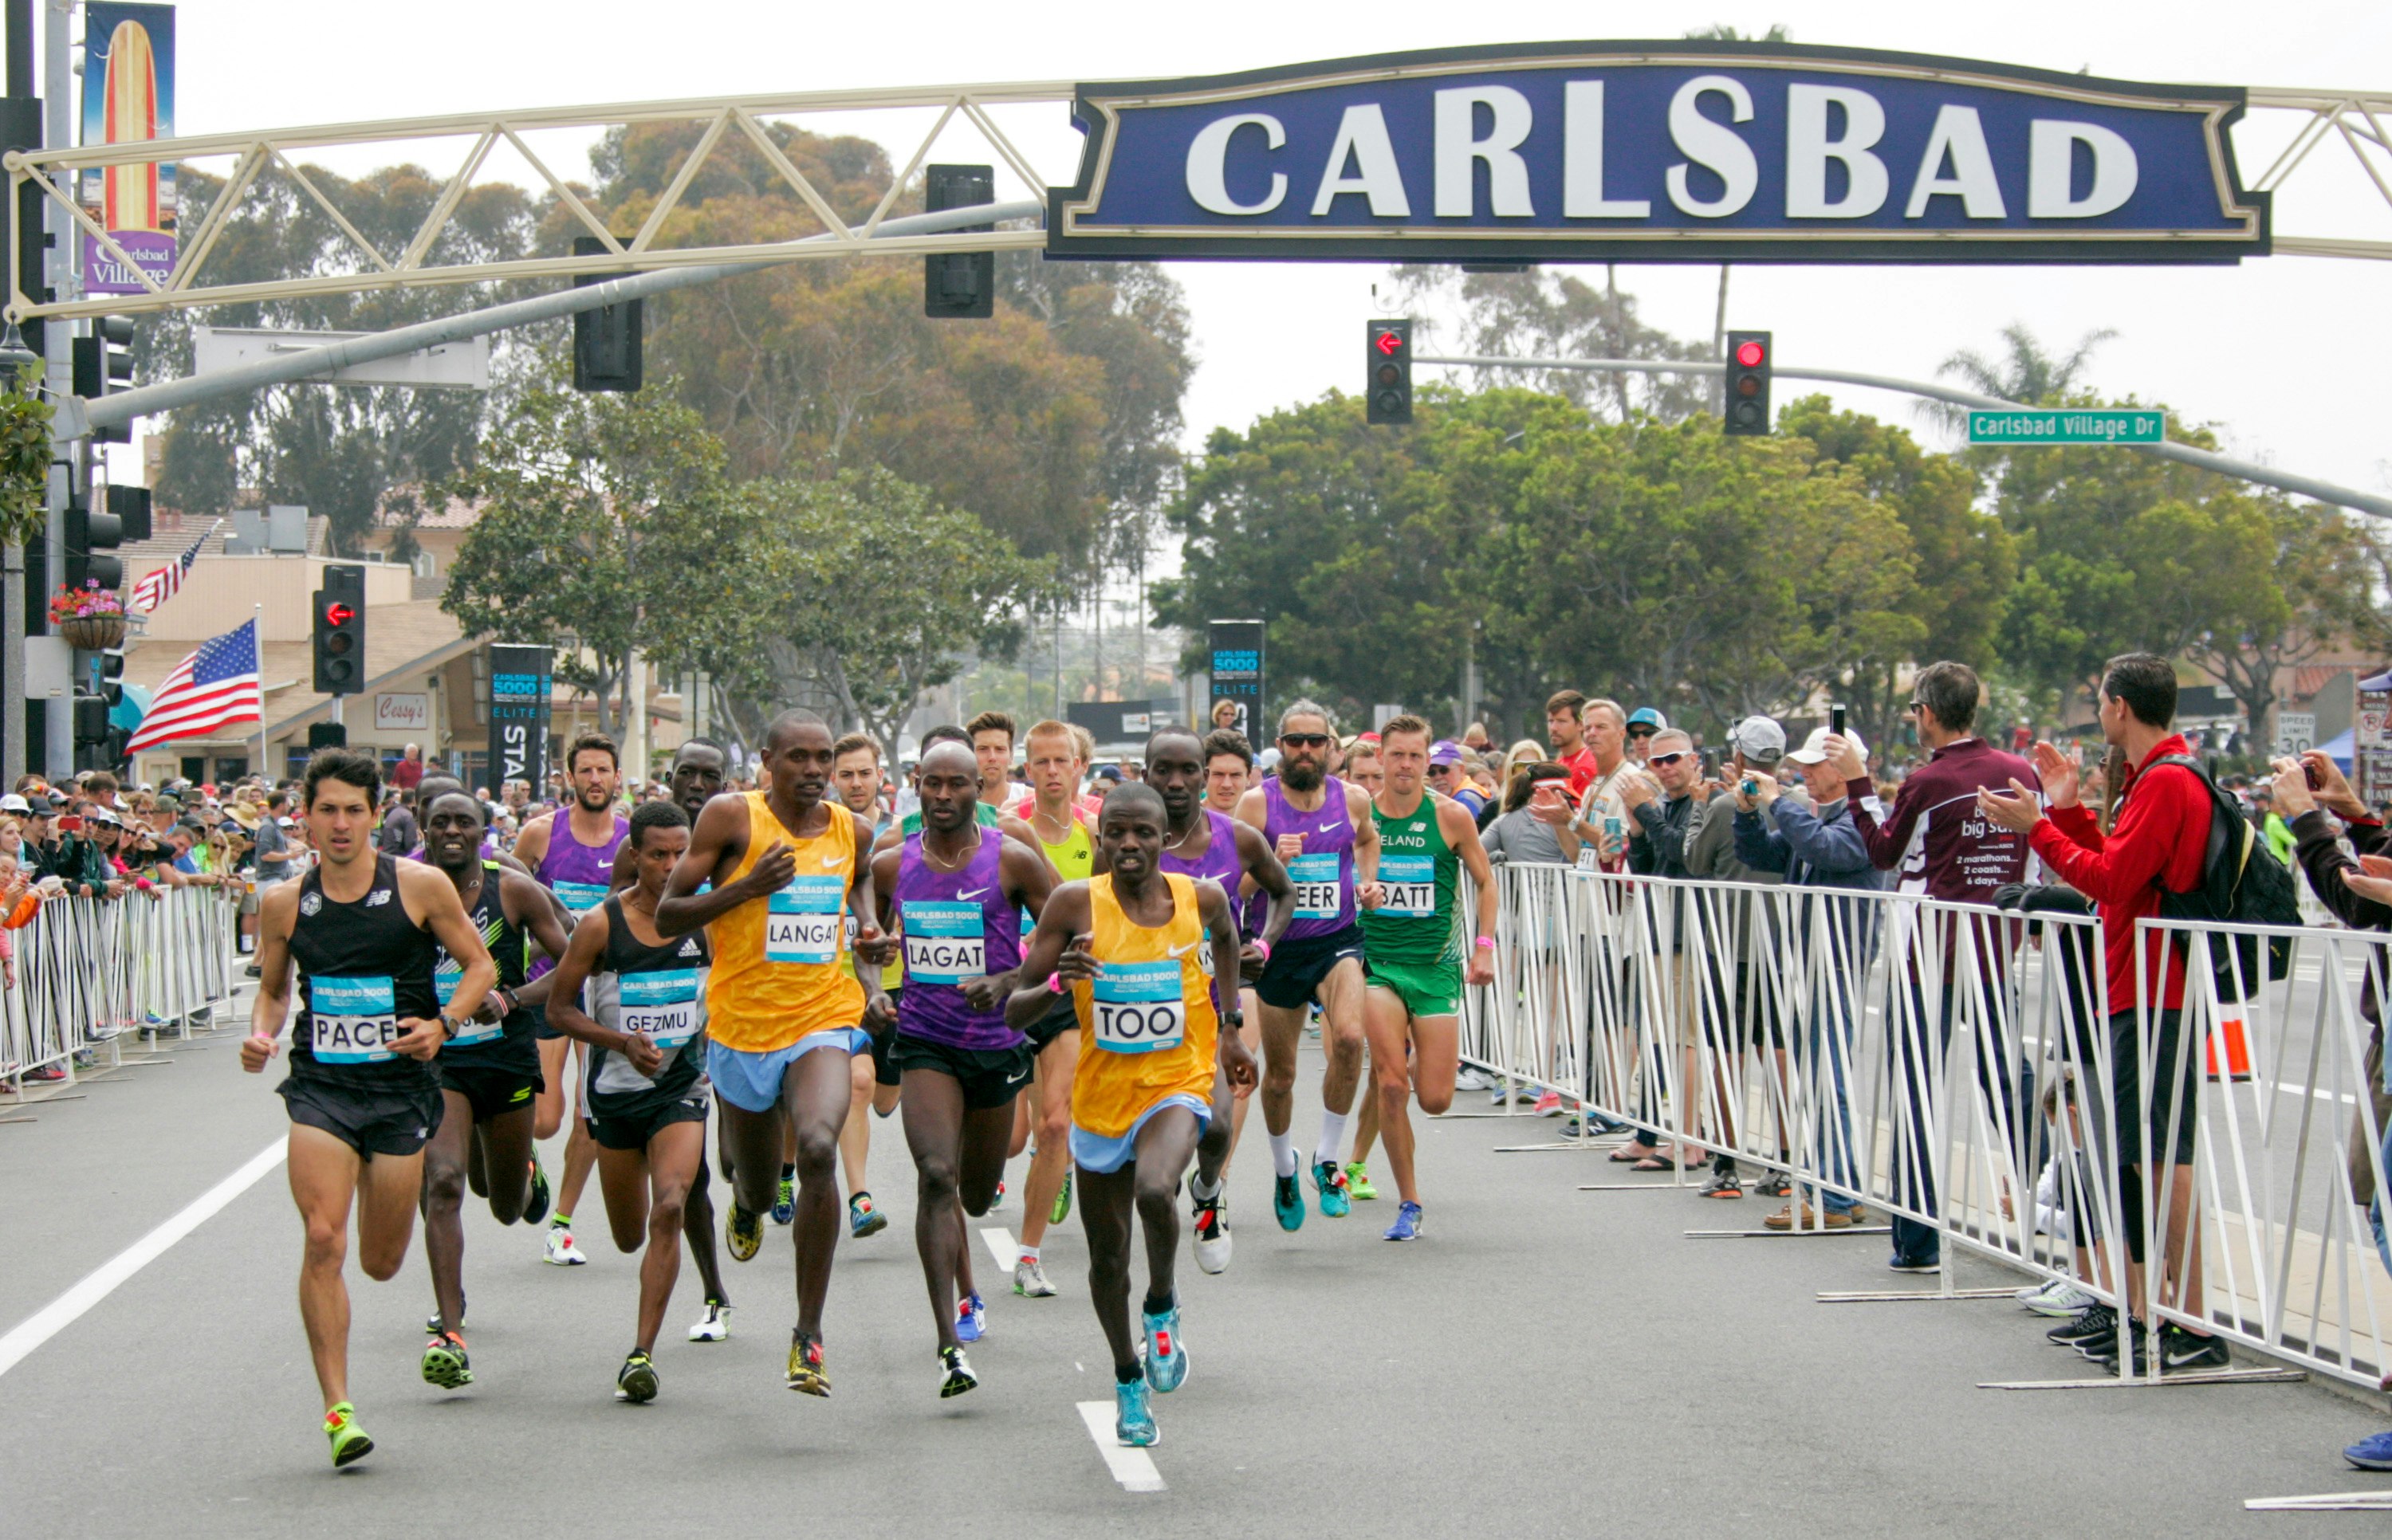 A group of male runners run past an overhead sign that says 'Carlsbad' on a closed off street in Carlsbad, California